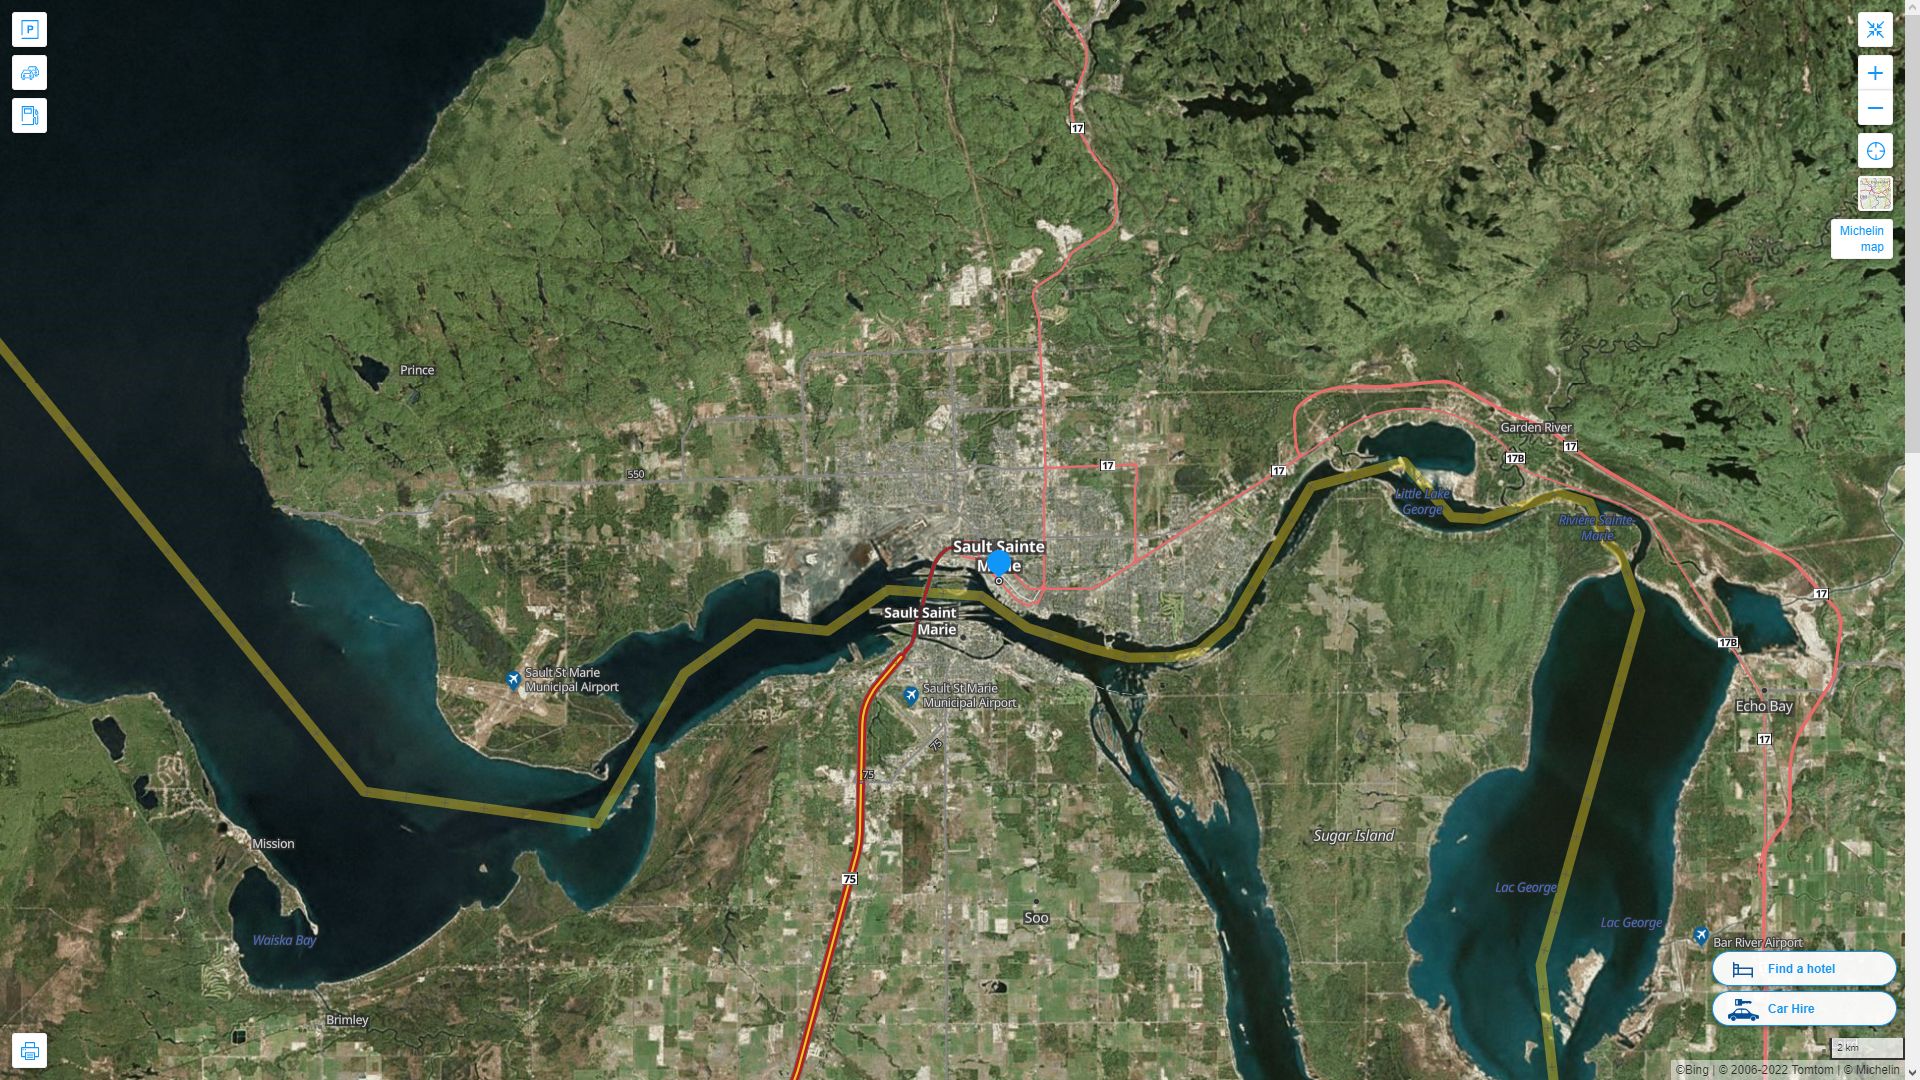 Sault Ste. Marie Highway and Road Map with Satellite View